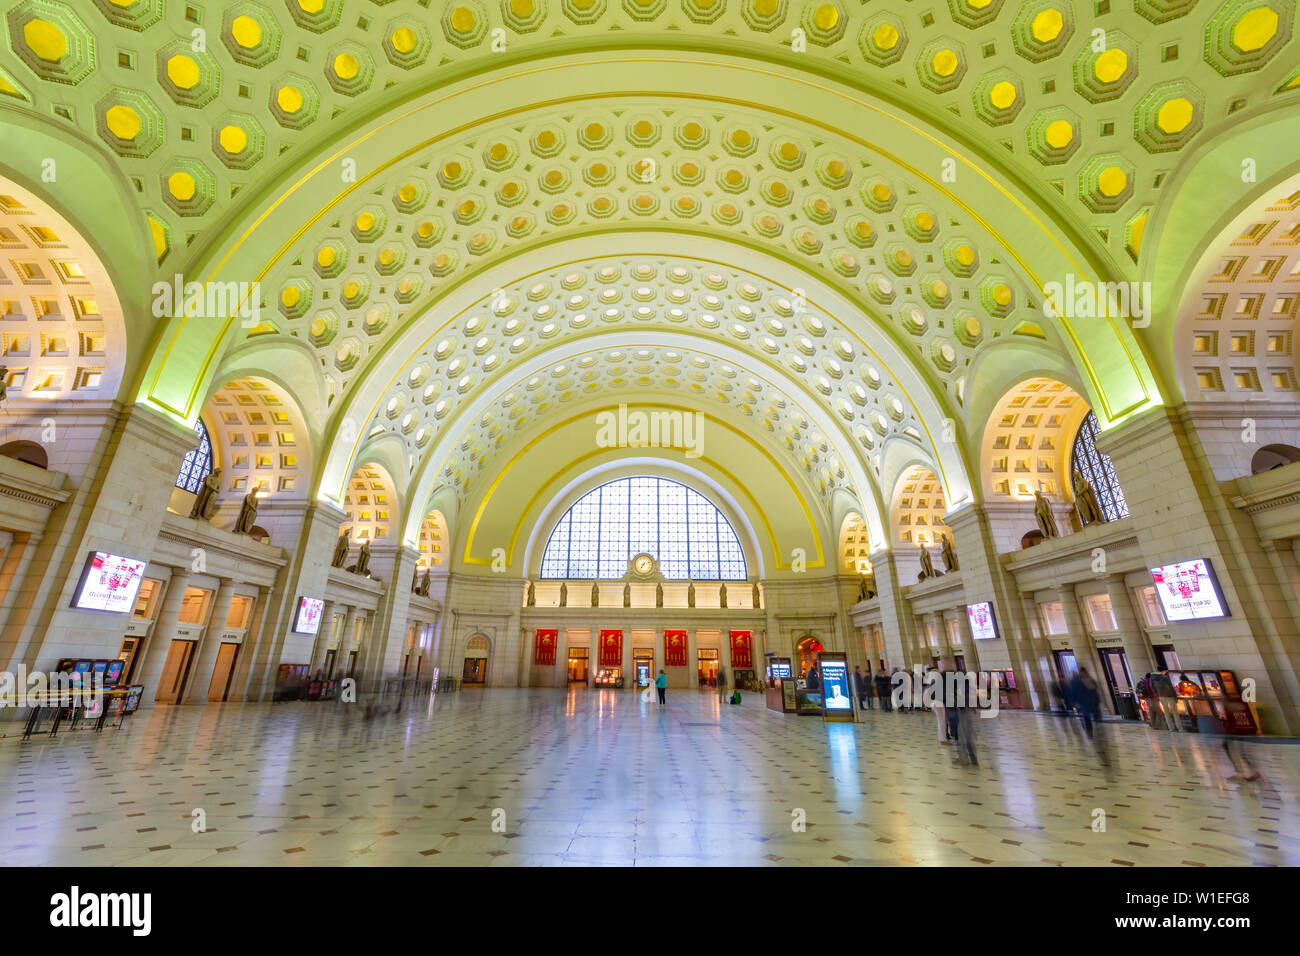 View of the interior of Union Station, Washington D.C., United States of America, North America Stock Photo